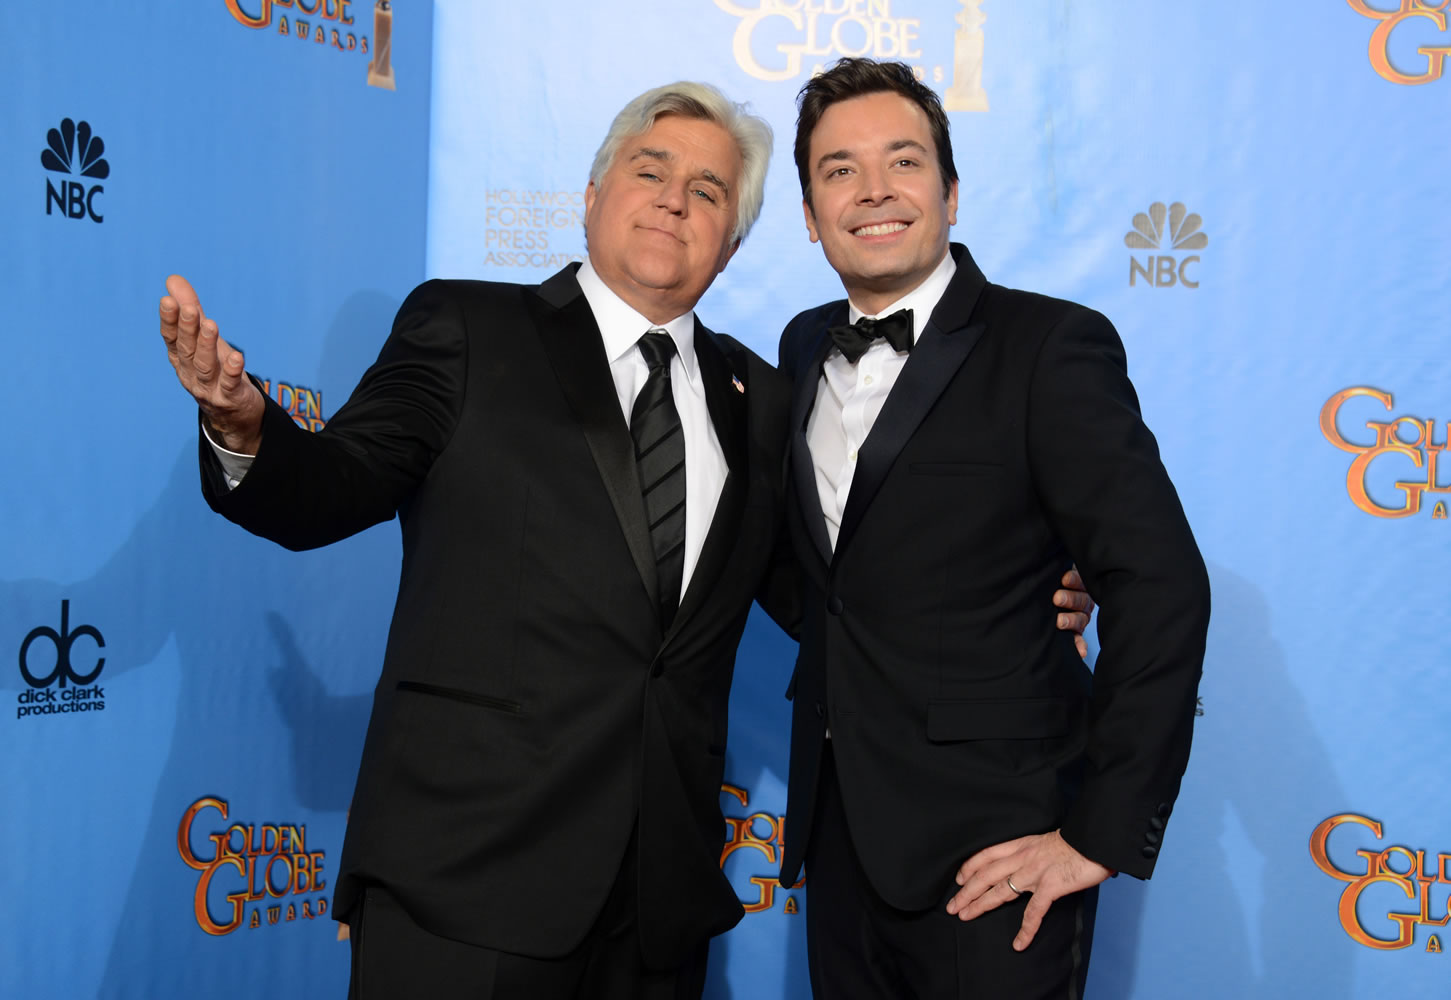 This Jan. 13, 2013 file photo shows Jay Leno, host of &quot;The Tonight Show with Jay Leno,&quot; left, and Jimmy Fallon, host of &quot;Late Night with Jimmy Fallon&quot; backstage at the 70th Annual Golden Globe Awards in Beverly Hills, Calif. Leno and Jimmy Fallon poked fun at the late-night rumors swirling around them in a music video that aired between their back-to-back NBC shows on Monday, April 1.